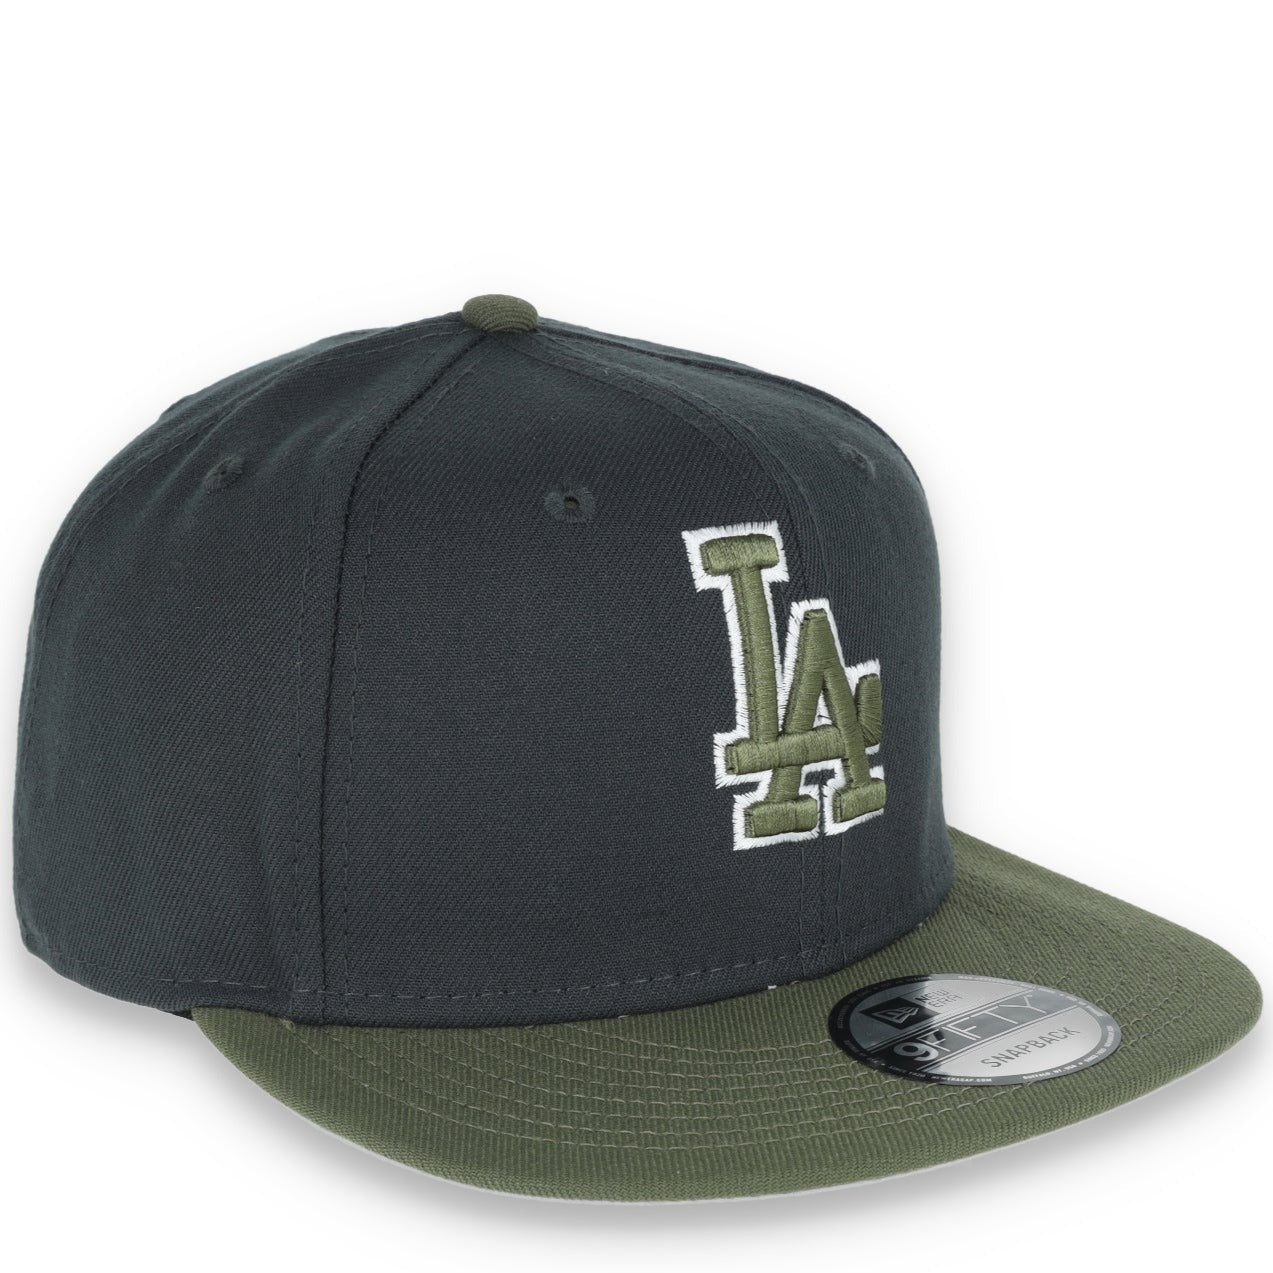 New Era Los Angeles Dodgers 2-Tone Color Pack 9FIFTY Snapback Hat- Grey/Olive